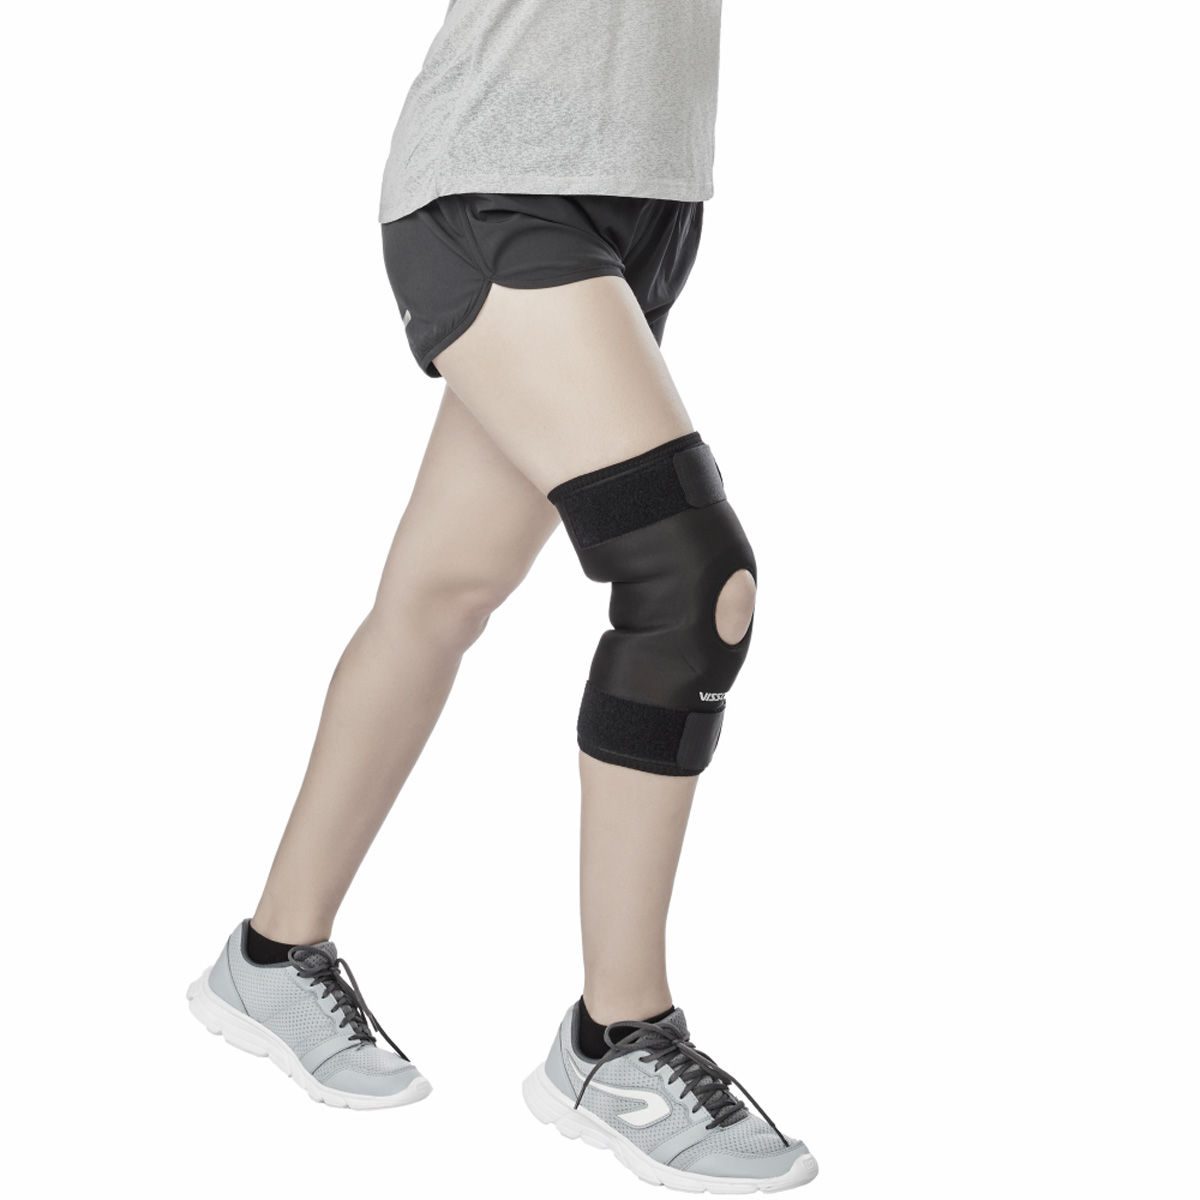 Vissco Special-0732 Core Functional Knee Wrap, 1 Count Price, Uses ...